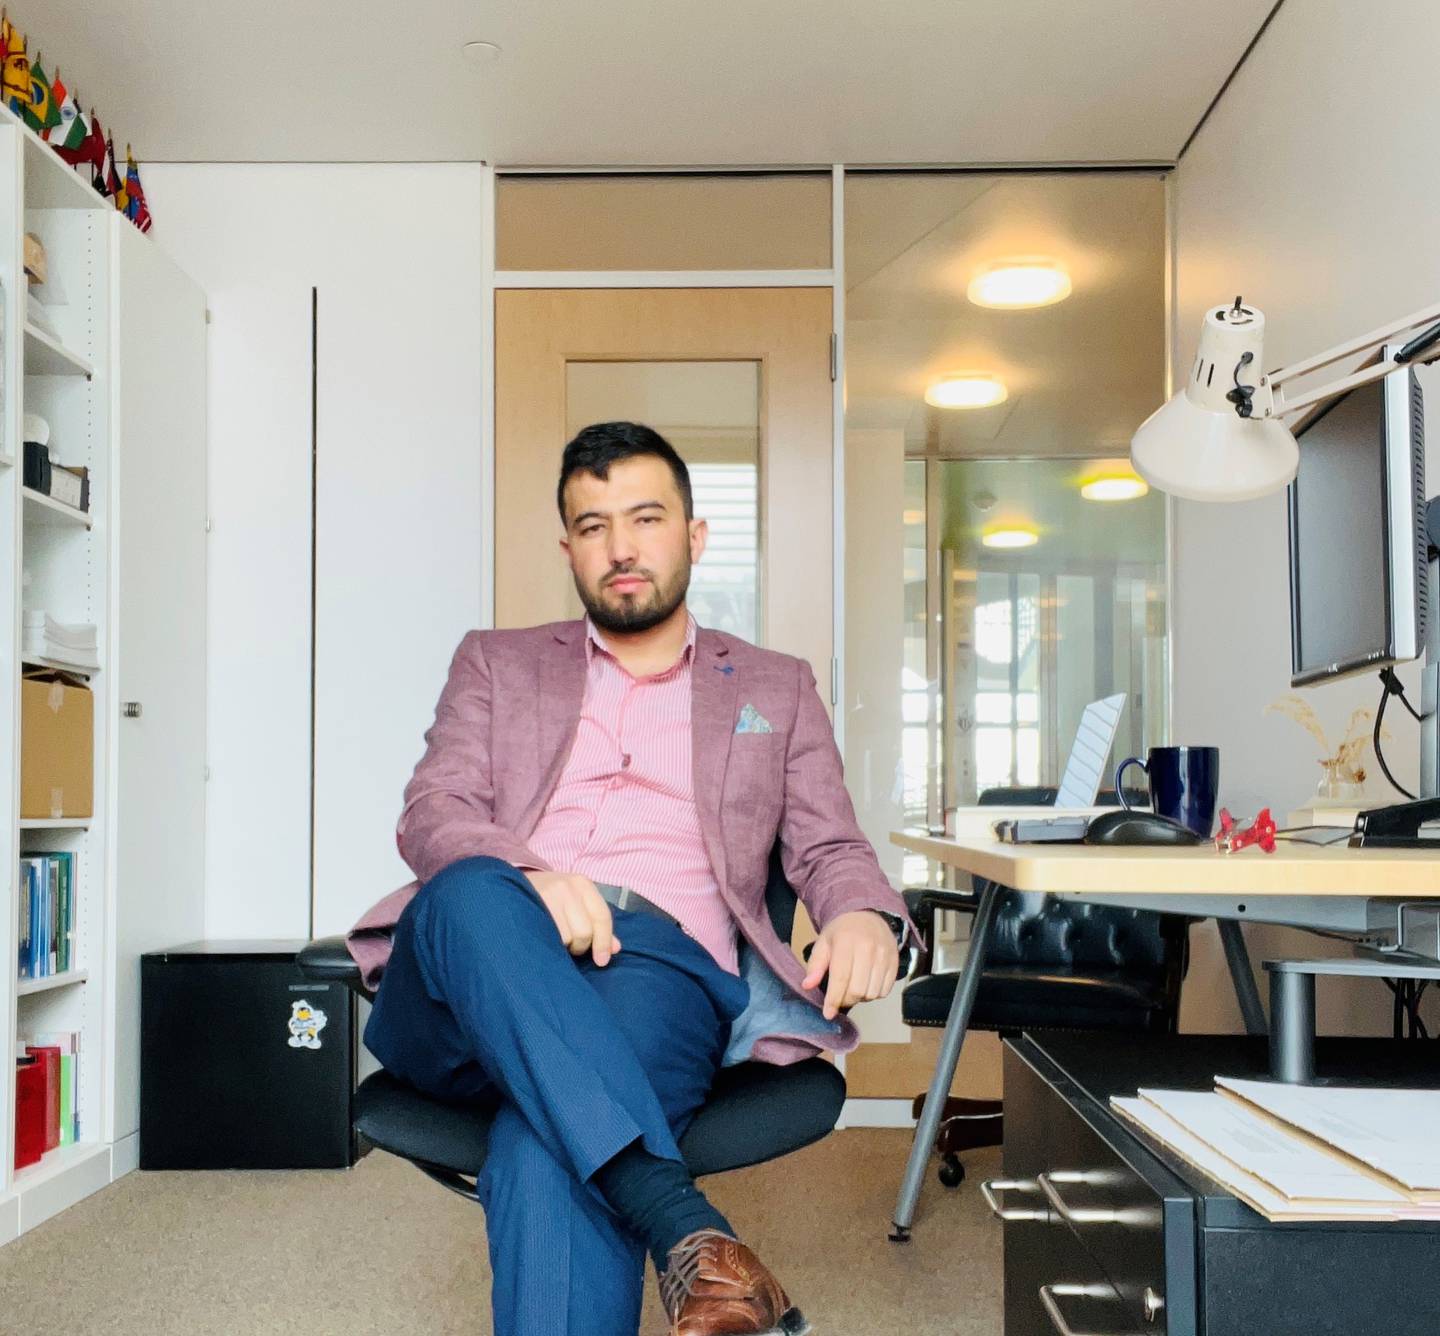 Sayed Wakil Musleh, an Afghan lawyer and refugee who now lives in Baltimore, sits in his office at the University of Baltimore School of Law.